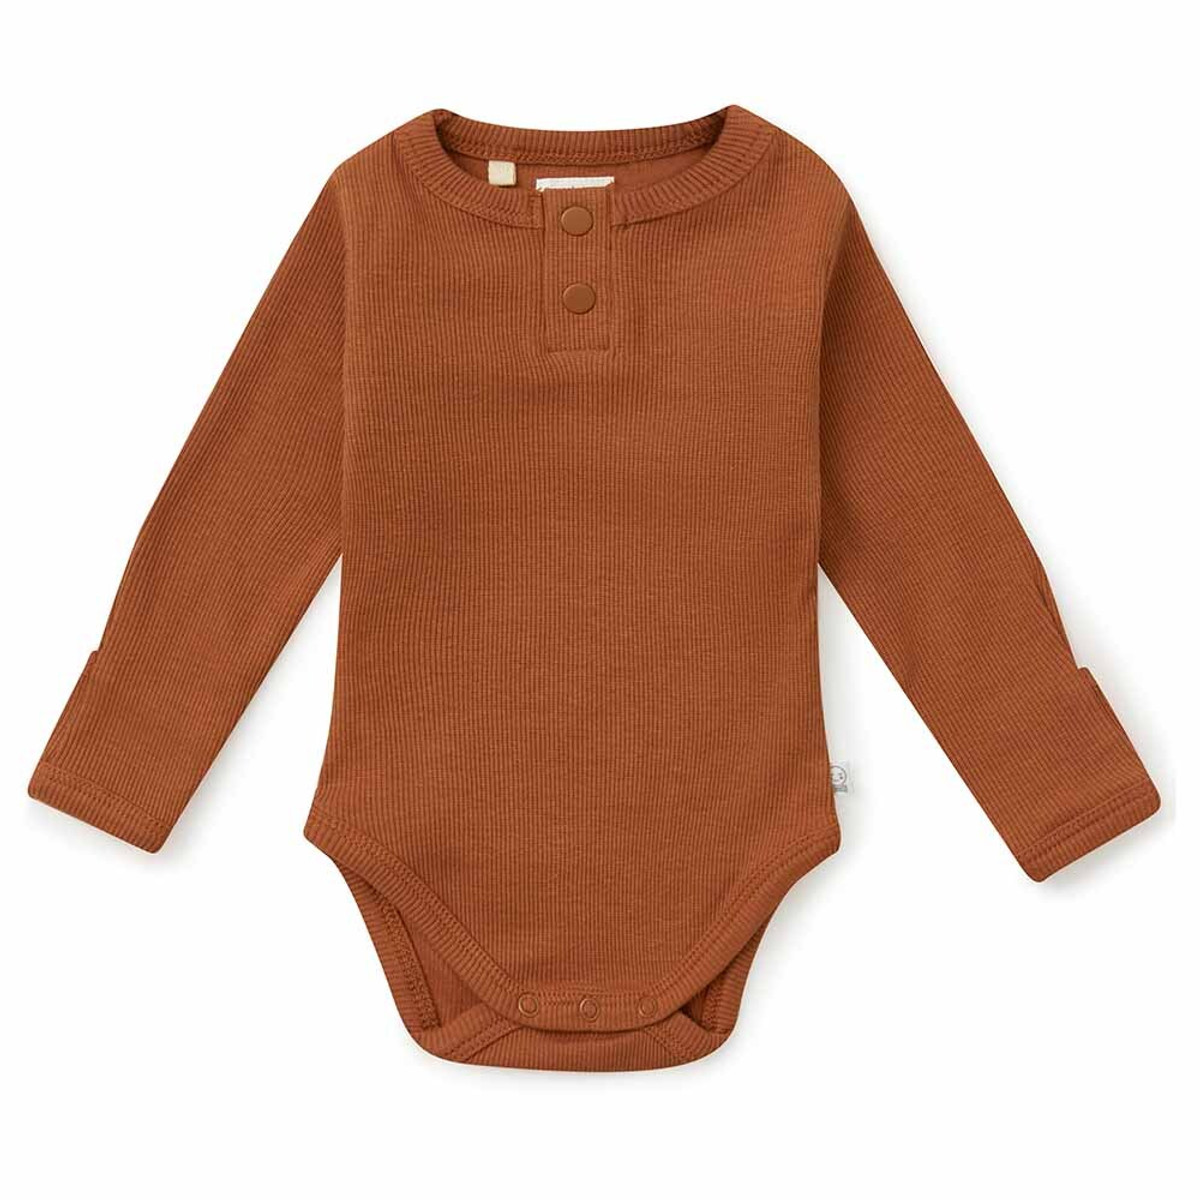 SNUGGLE HUNNY KIDS - BISCUIT LONG SLEEVE BODYSUIT